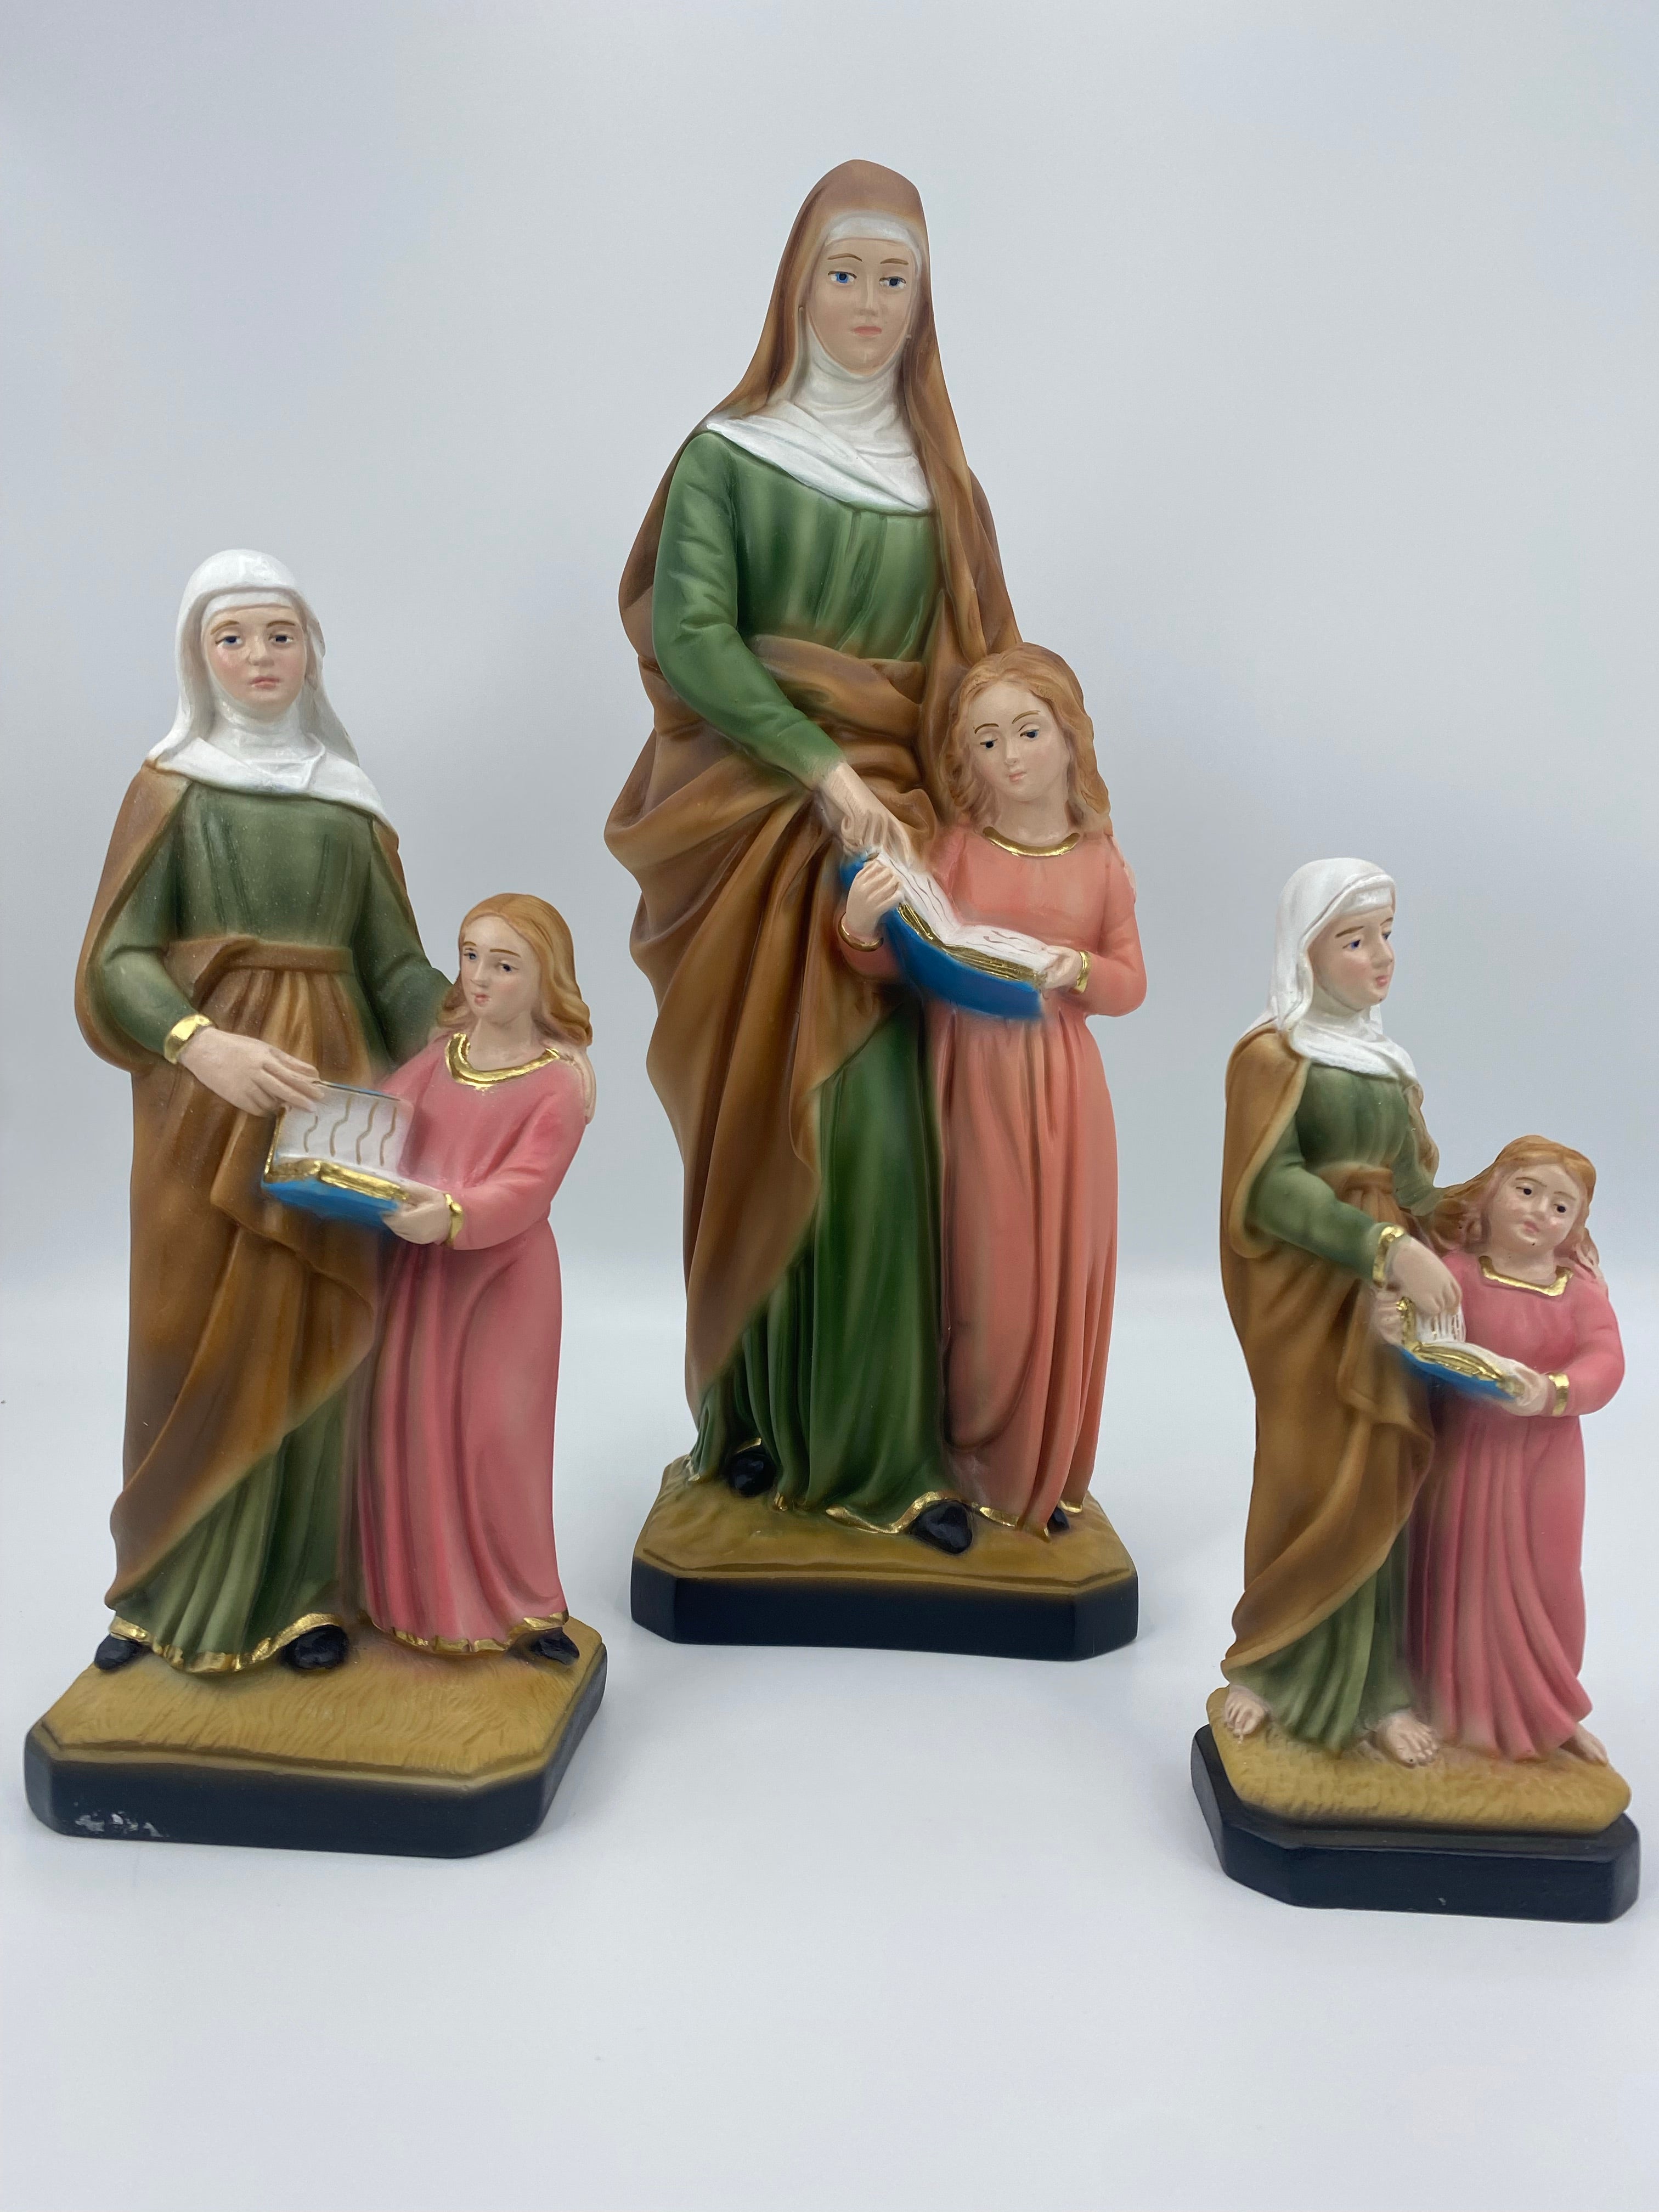 The Faith Gift Shop Saint Anne statue - Hand Painted in Italy - Our Tuscany Collection - Estatua de Santa Ana